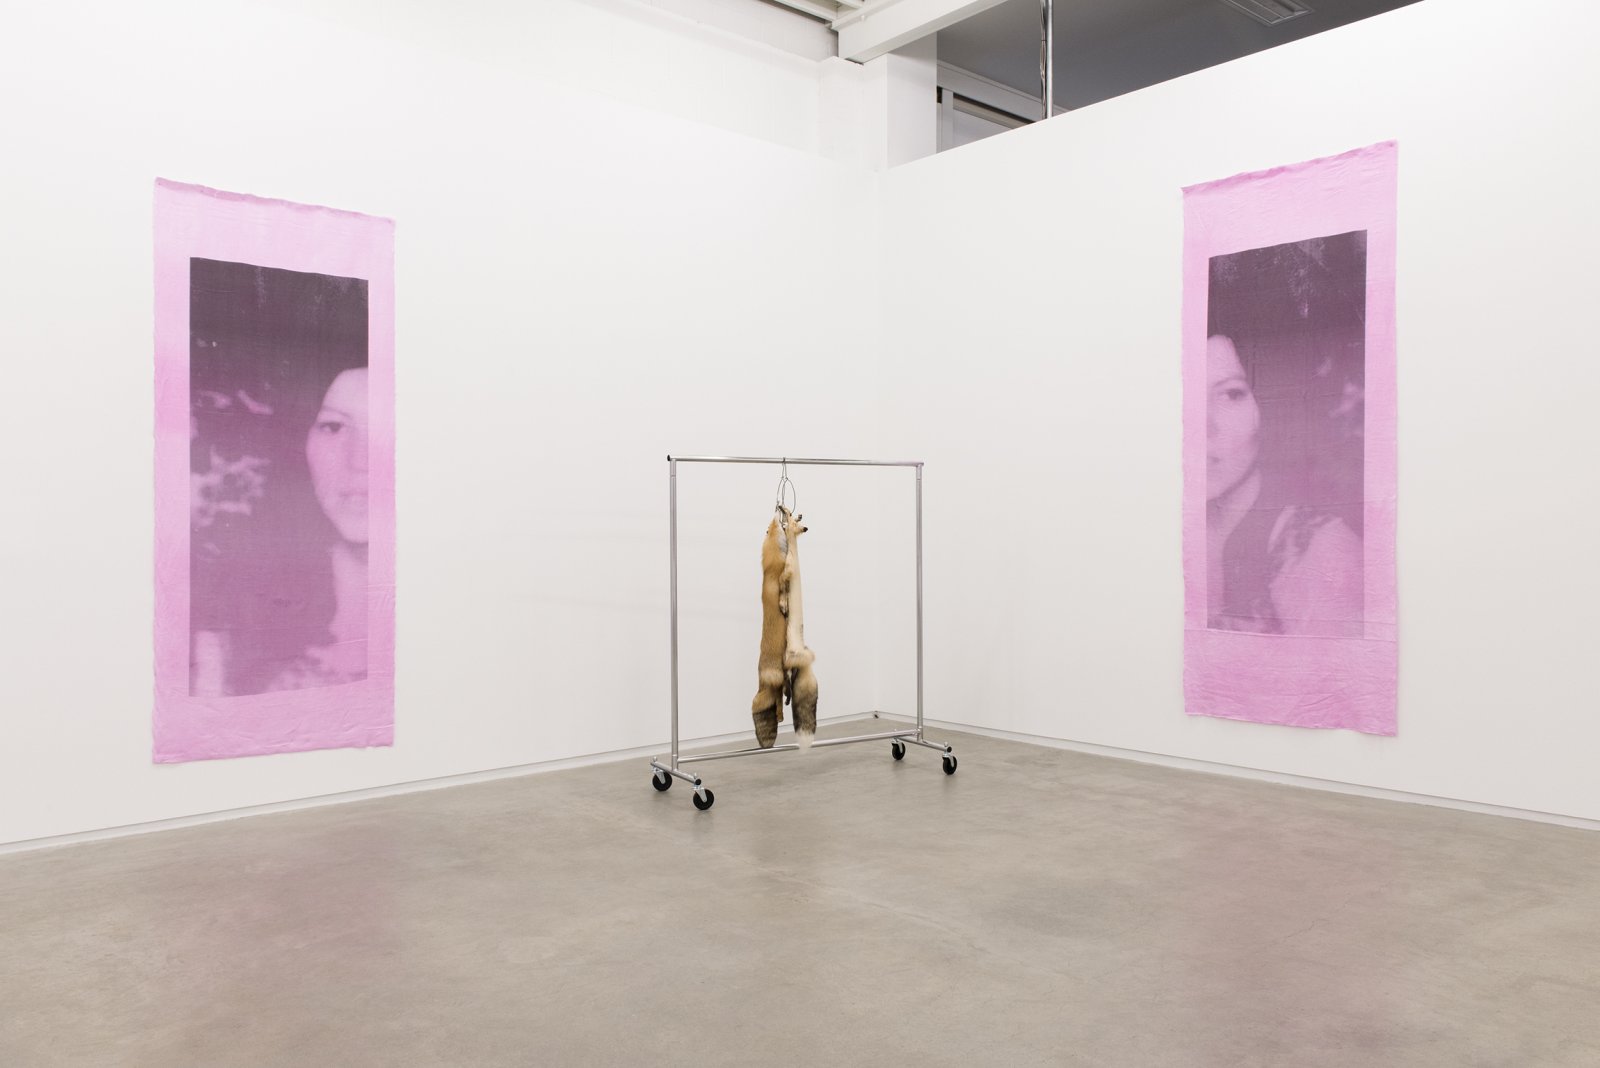 Duane Linklater, installation view, But the sun is up and you're going?, Catriona Jeffries, 2014 by Duane Linklater